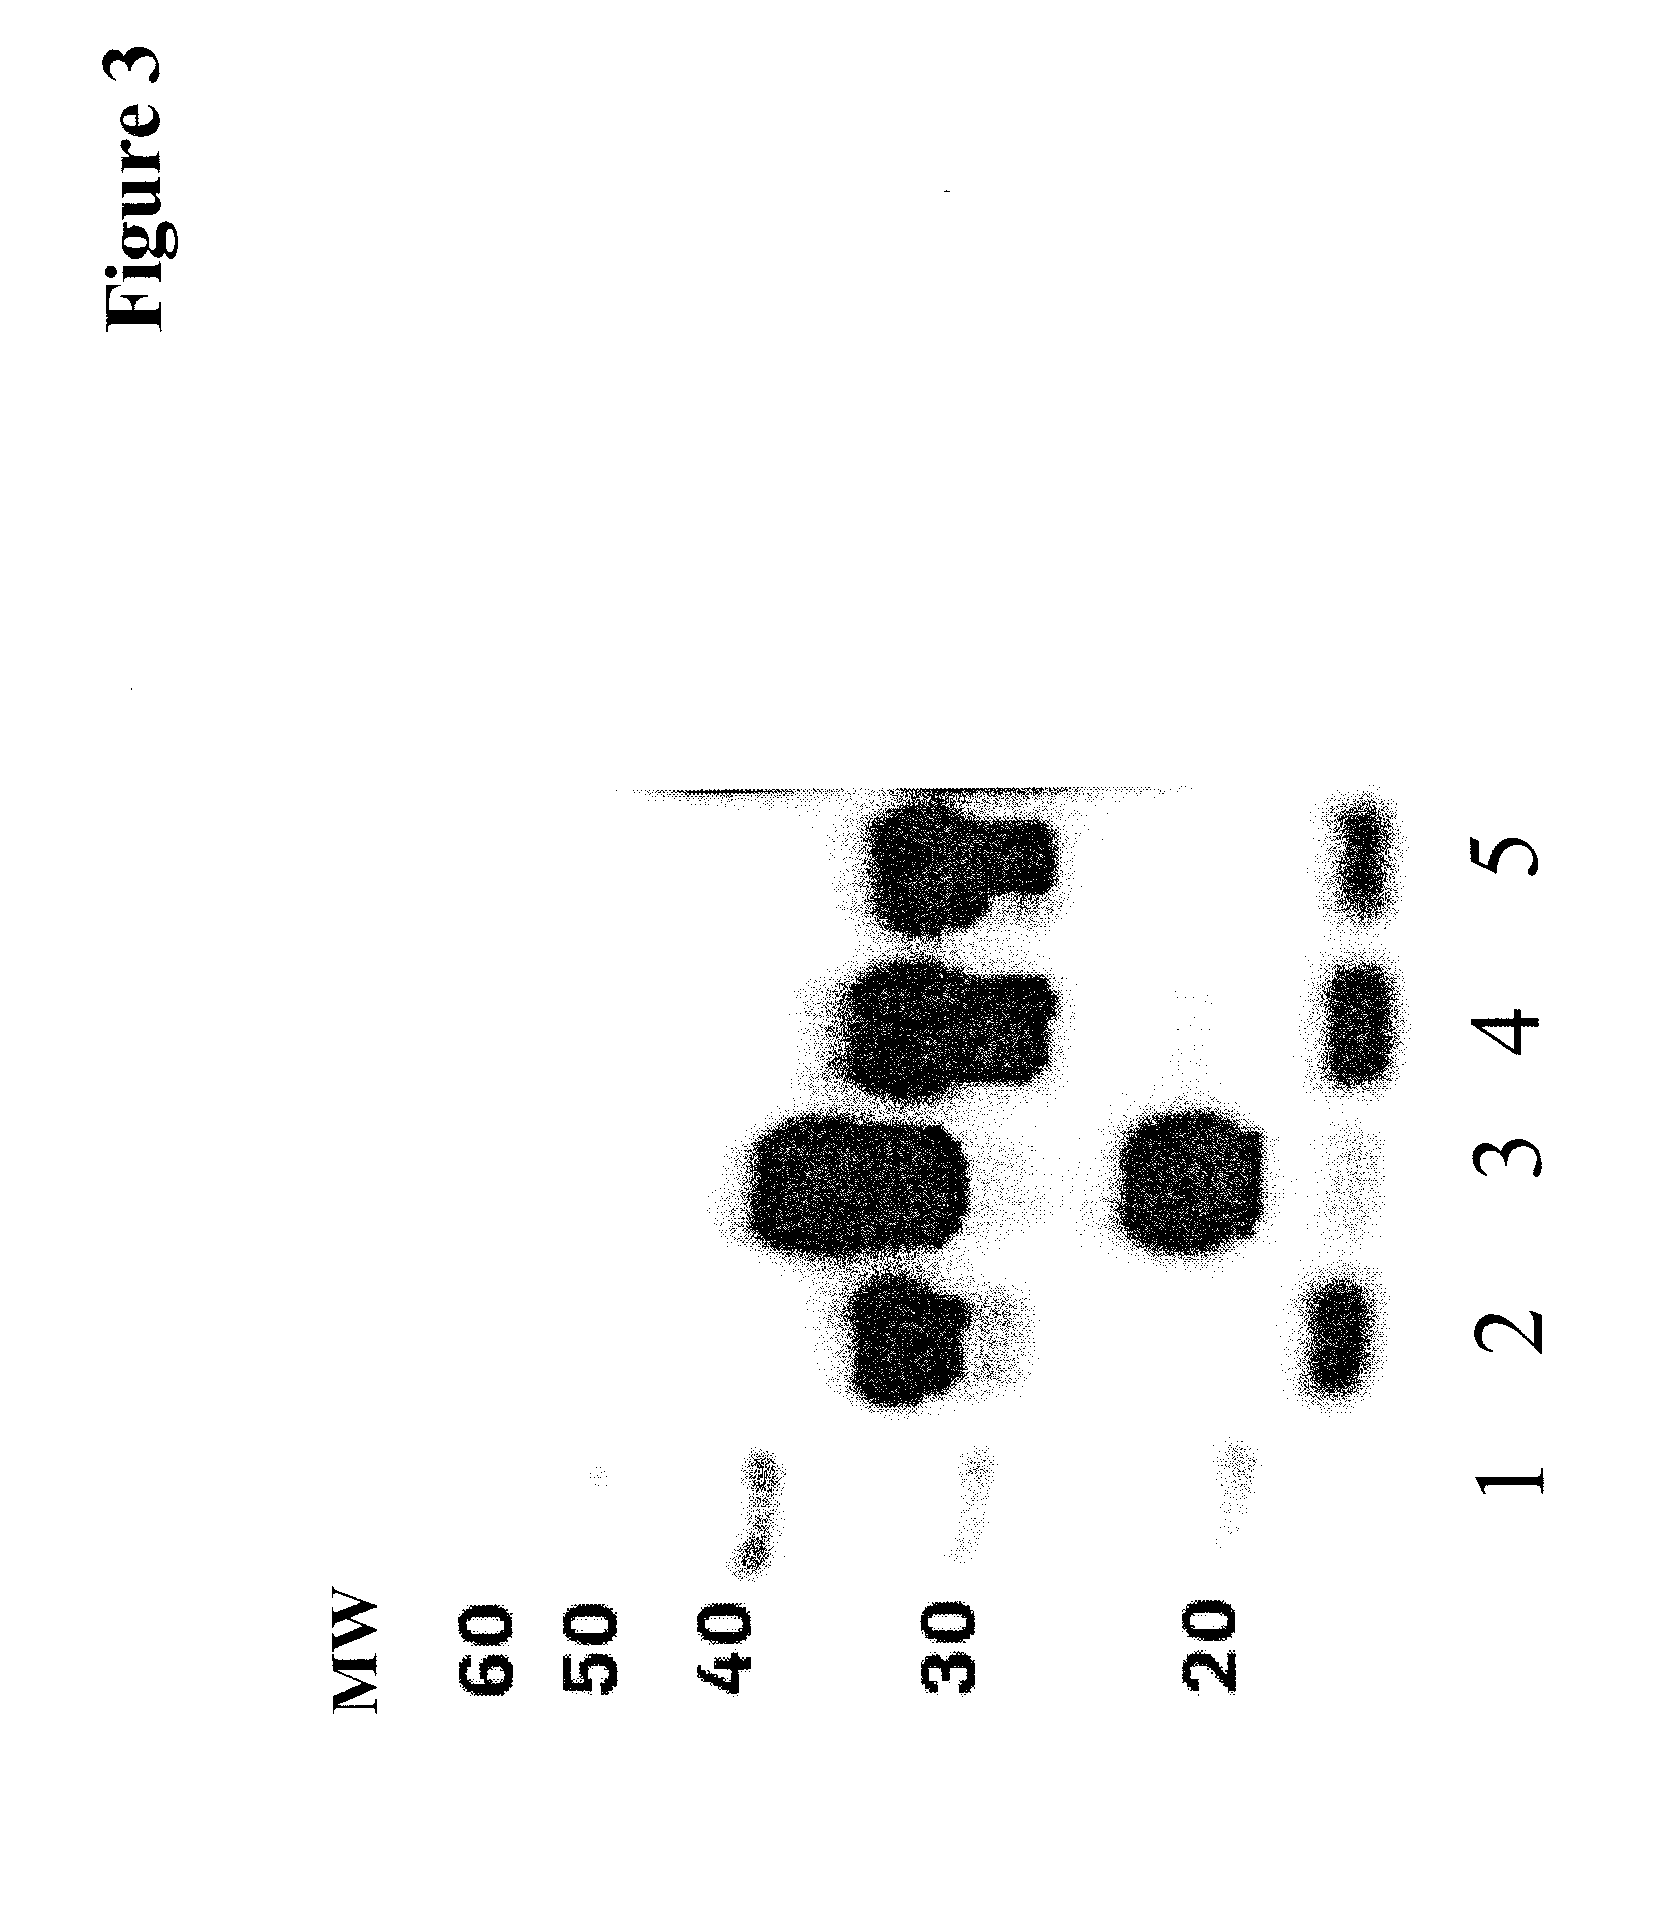 Improved recombinant polypeptide production methods